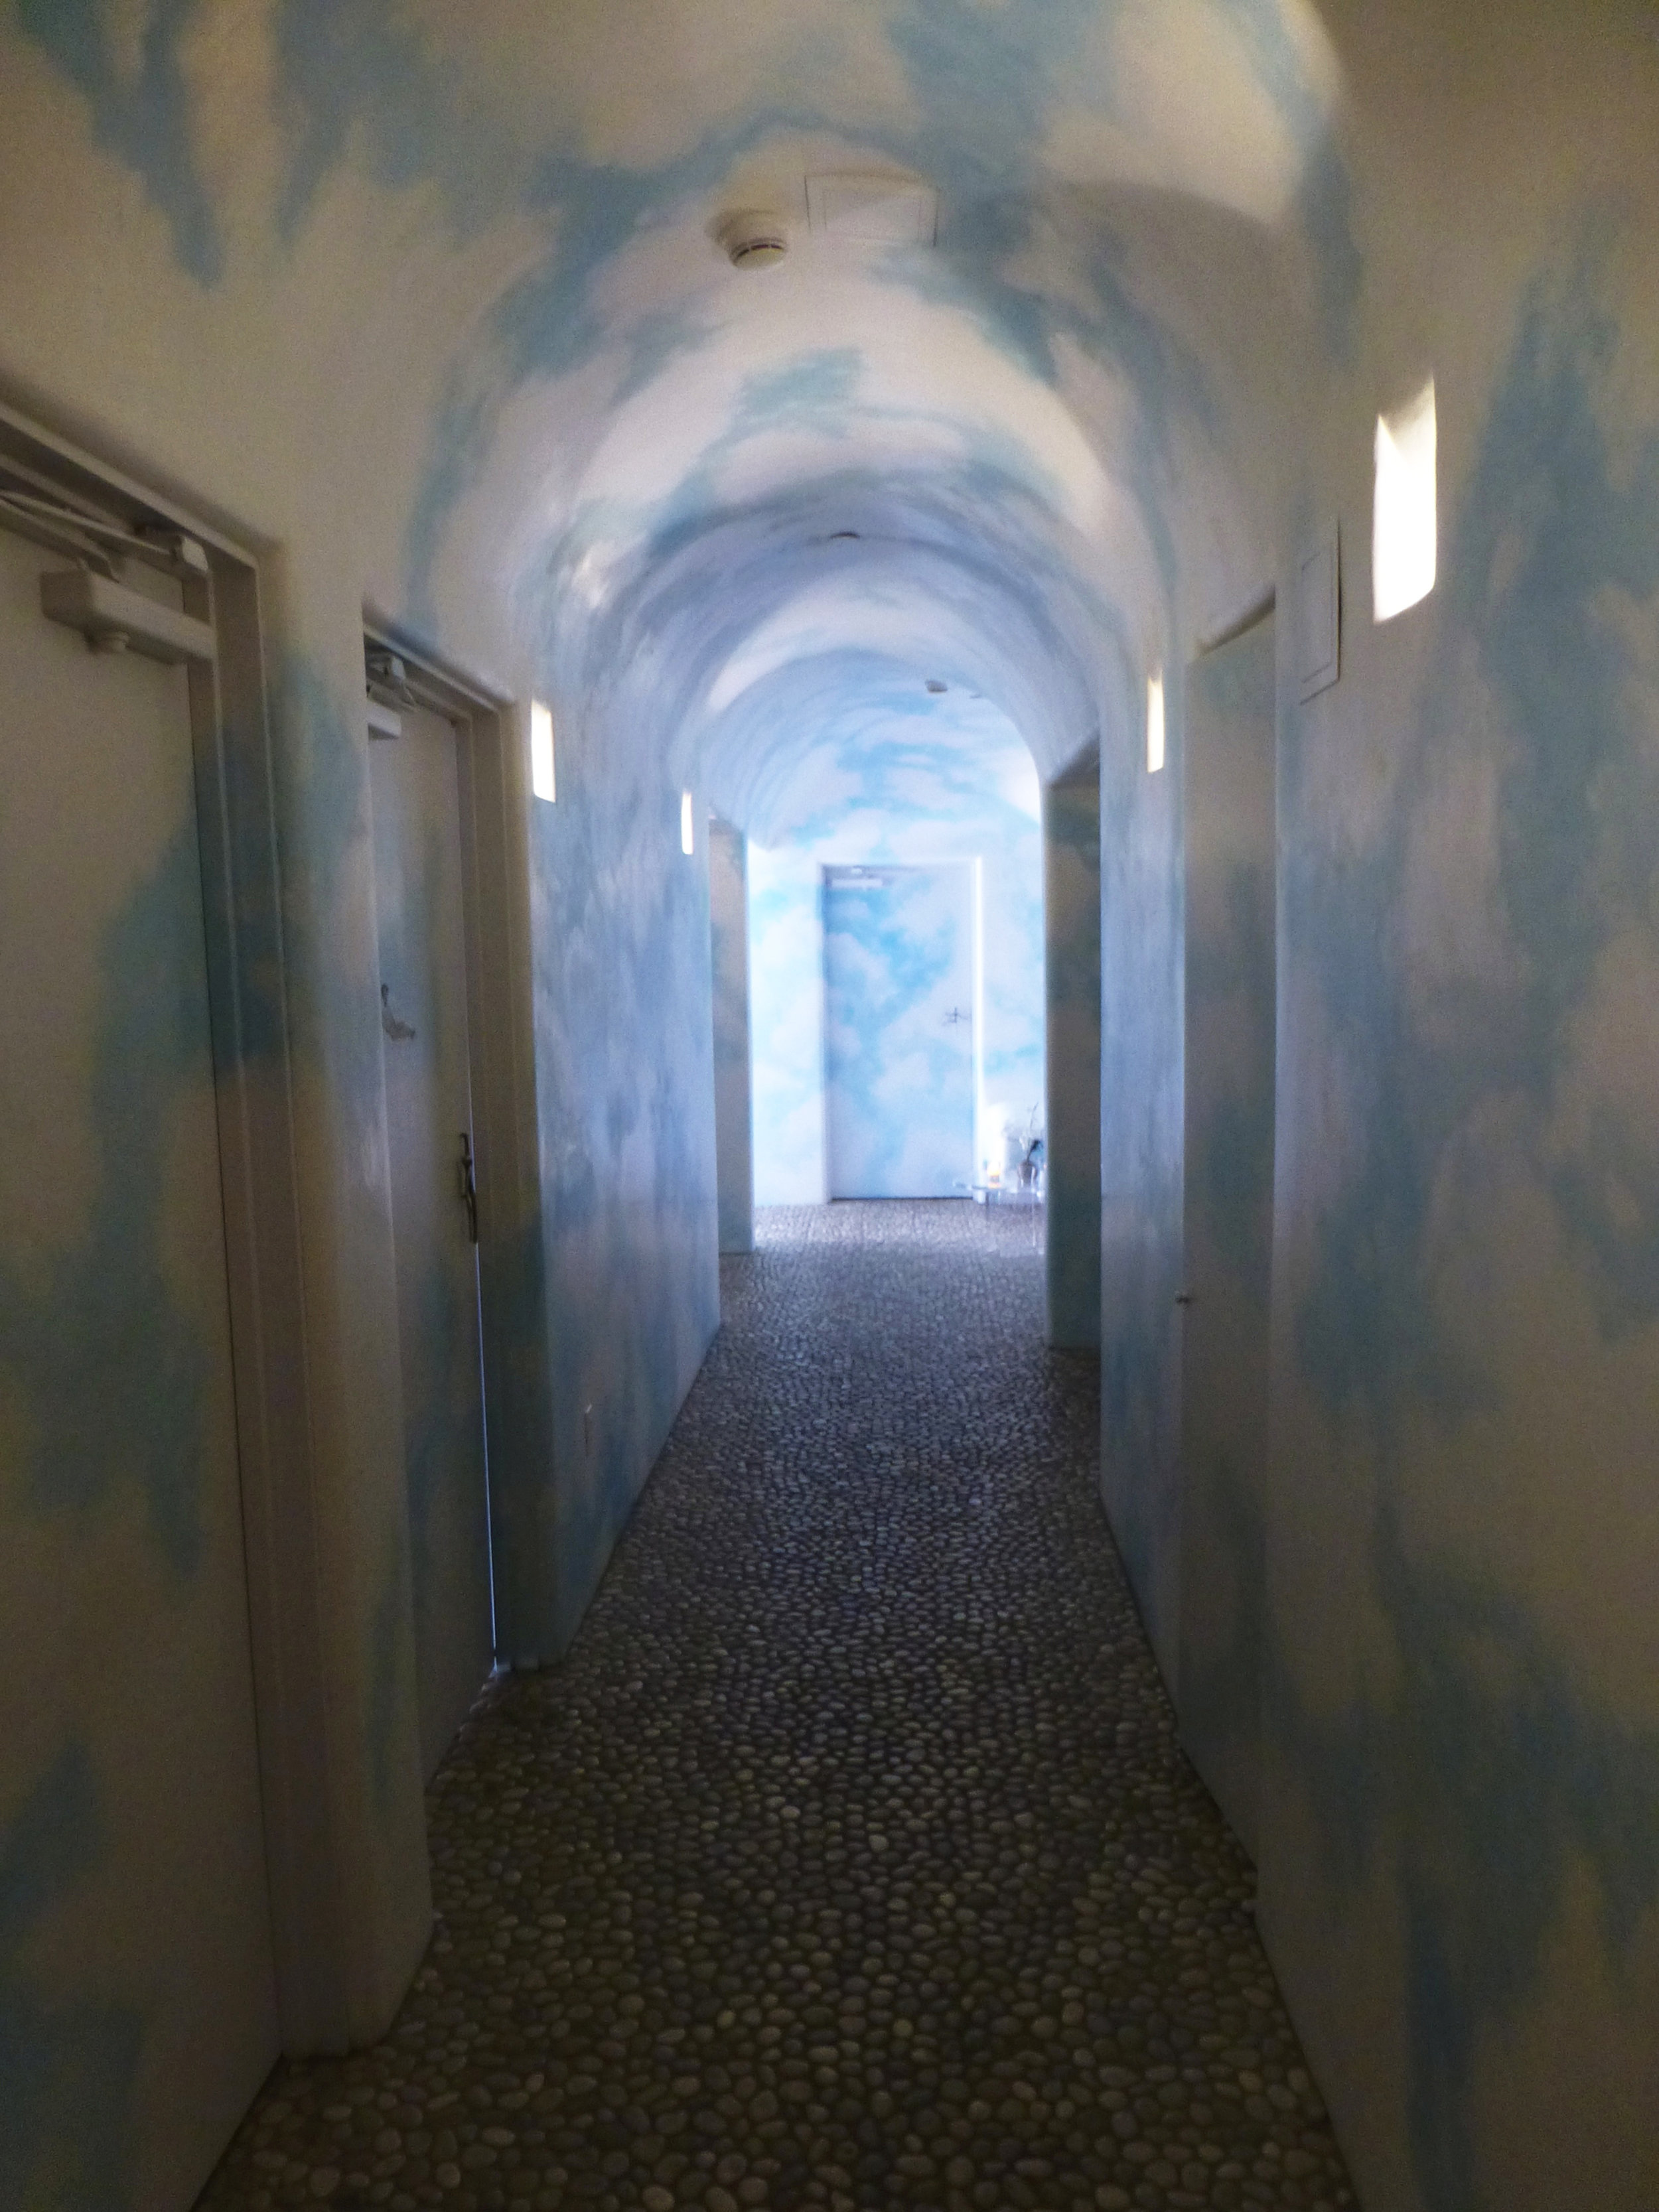 Spa interior painted with clouds